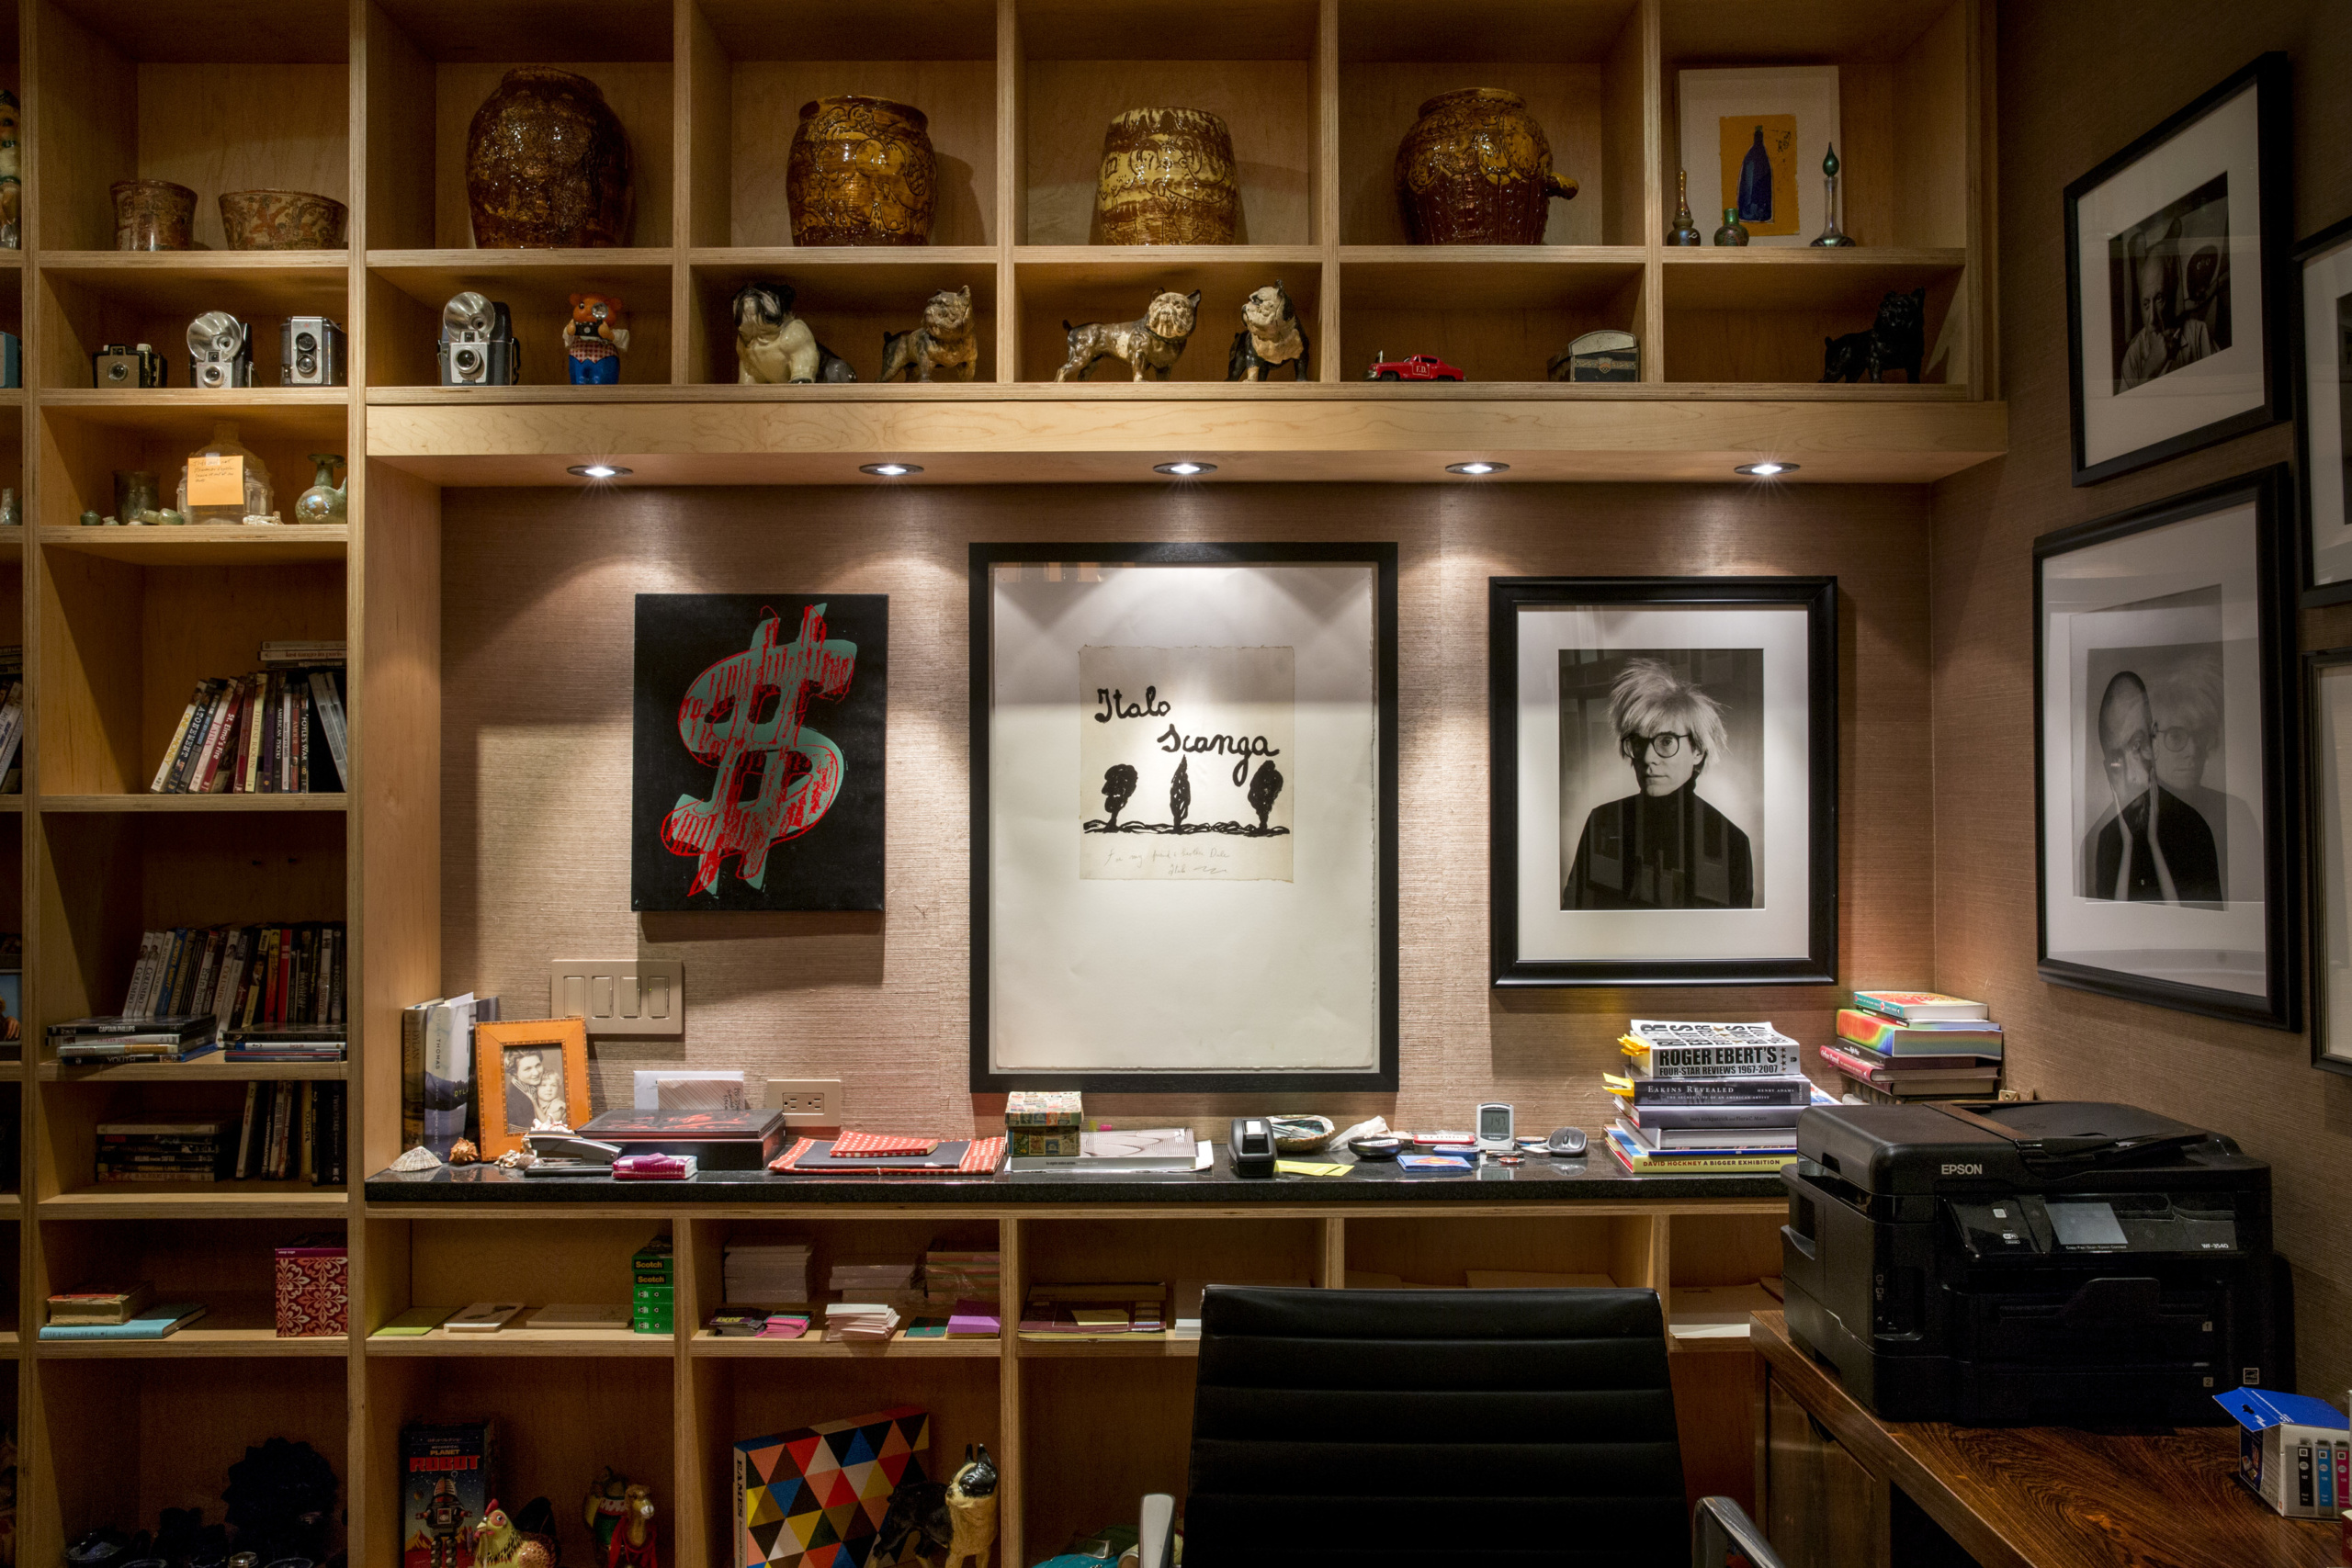 The office in Dale Chihuly’s Seattle home features artworks including Andy Warhol's Dollar Sign, 1981 Italo Scanga's For My Friend and Brother and Christopher Makos's Andy Glasses Four, 1986. Photography by Scott Mitchell Leen. © Chihuly Studio. All Rights Reserved.